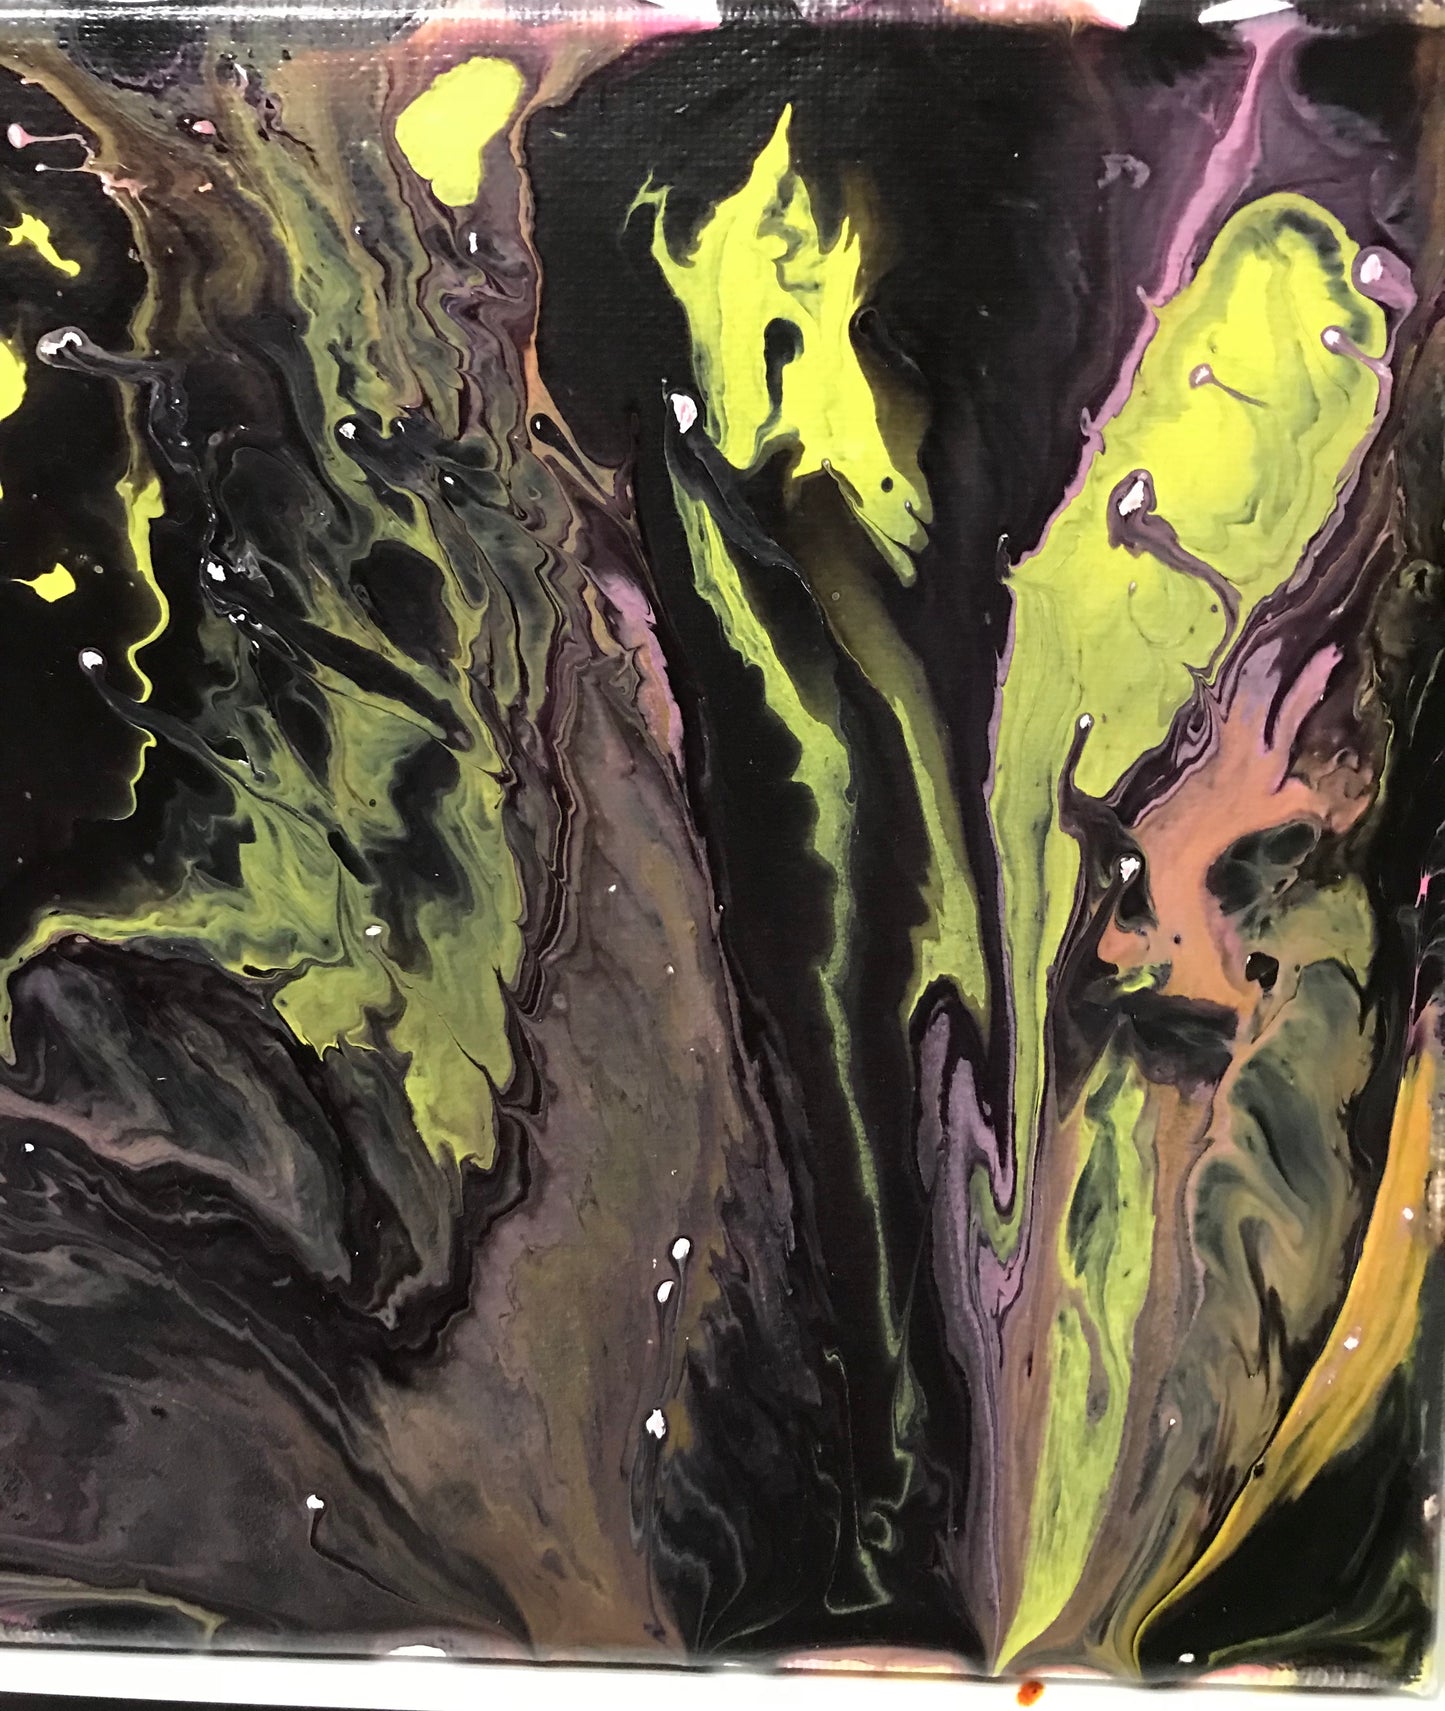 Sat, May 20th, 9-11A “Science & Art: Acrylic Pour” Public Family Painting Class